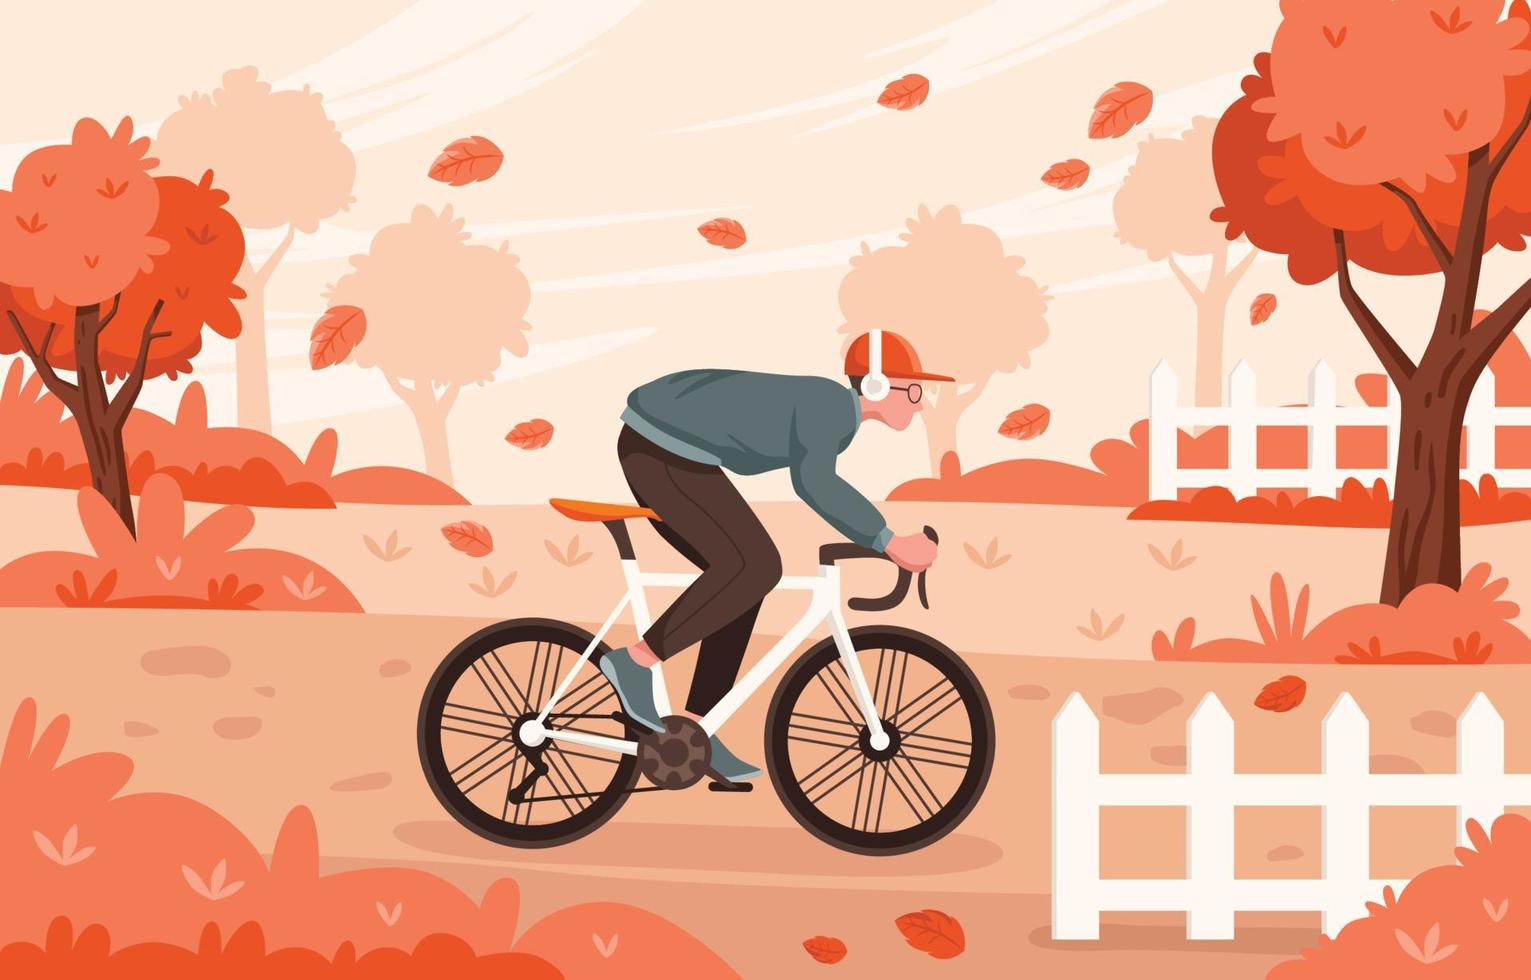 Biking In The Wind With Fallen Leaves vector